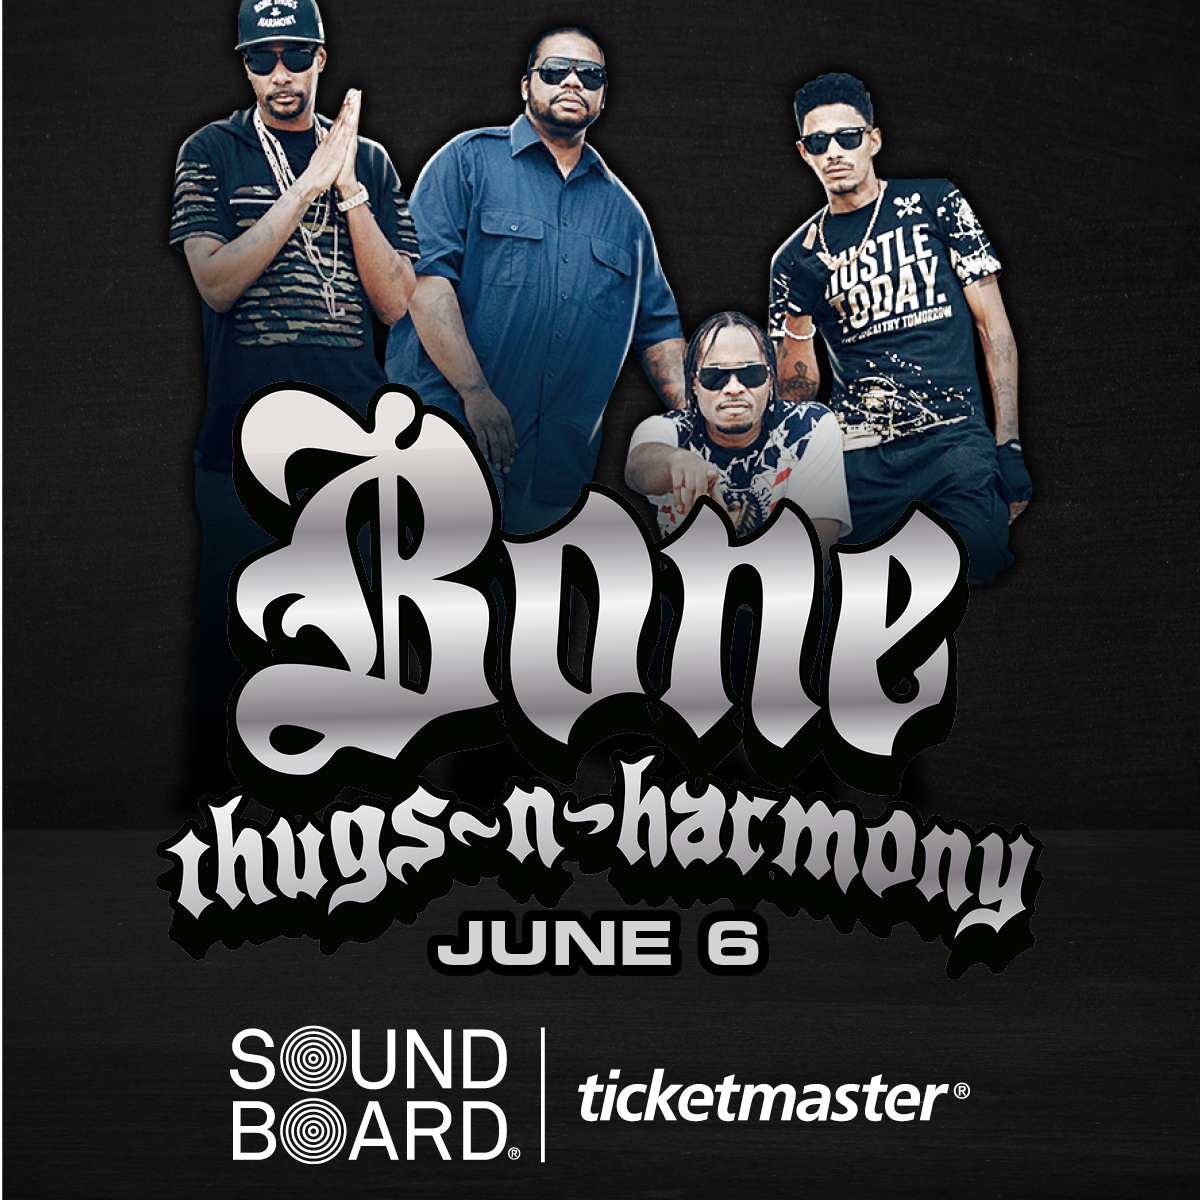 Catch Bone Thugs-N-Harmony as they take the Sound Board June 6! Grab your tickets now! 🎫👉 playm.cc/3ONjqYa